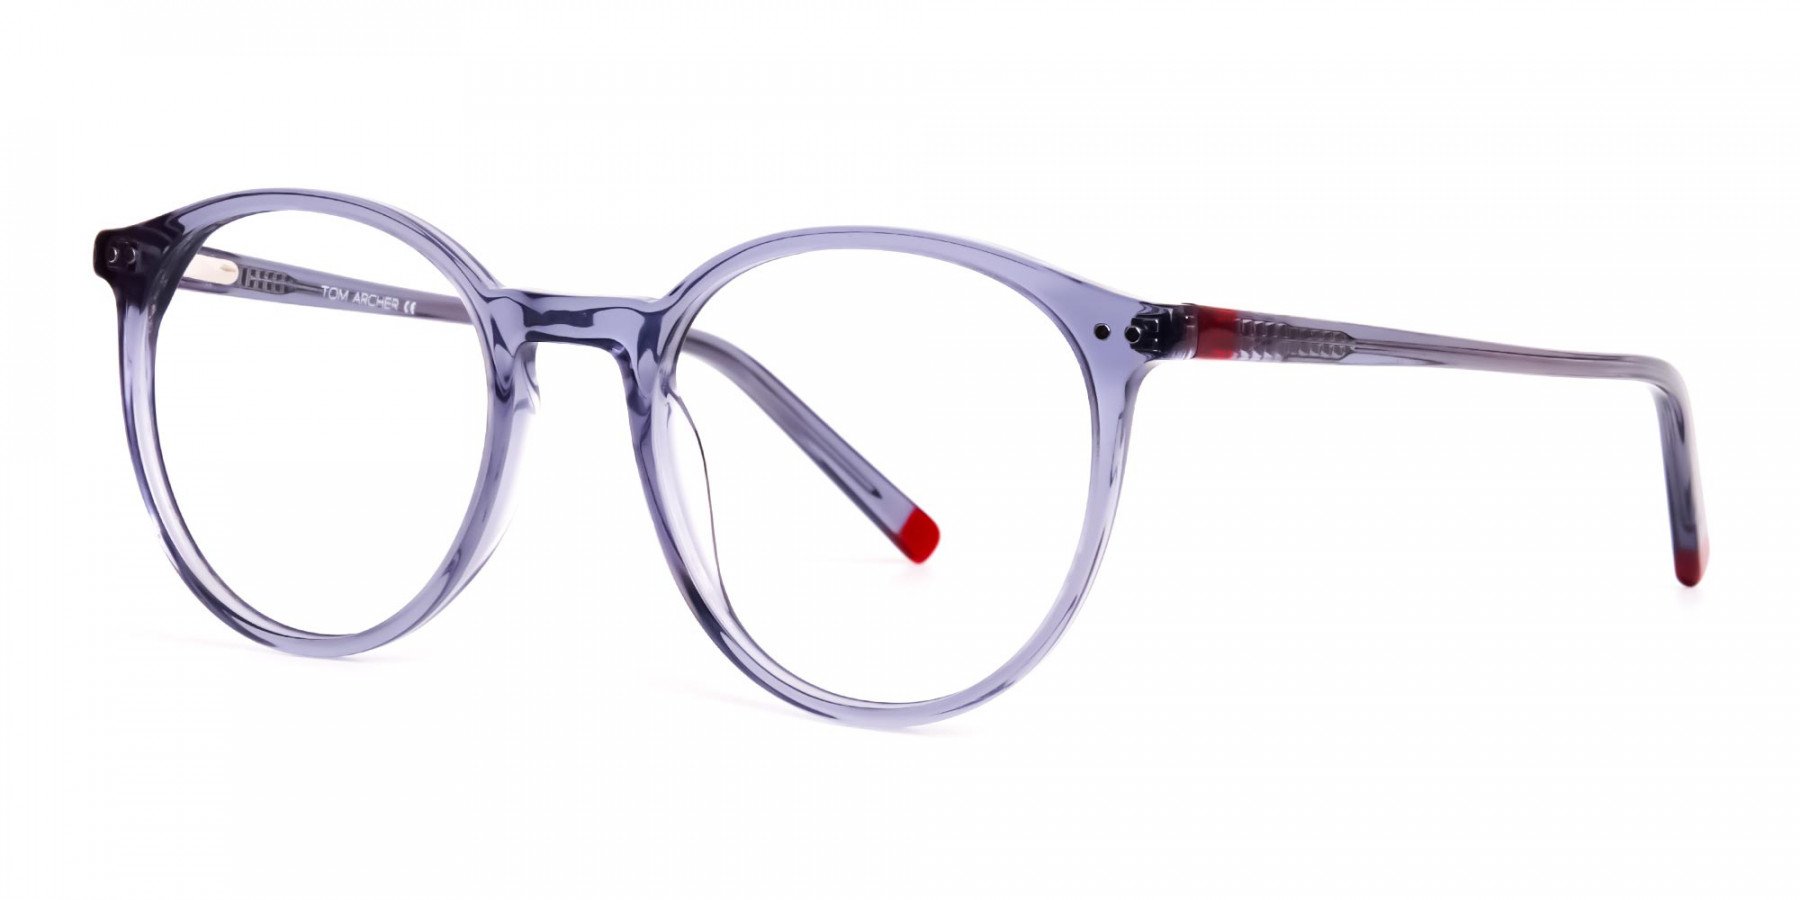 crystal-clear-and-transparent-grey-round-glasses-1